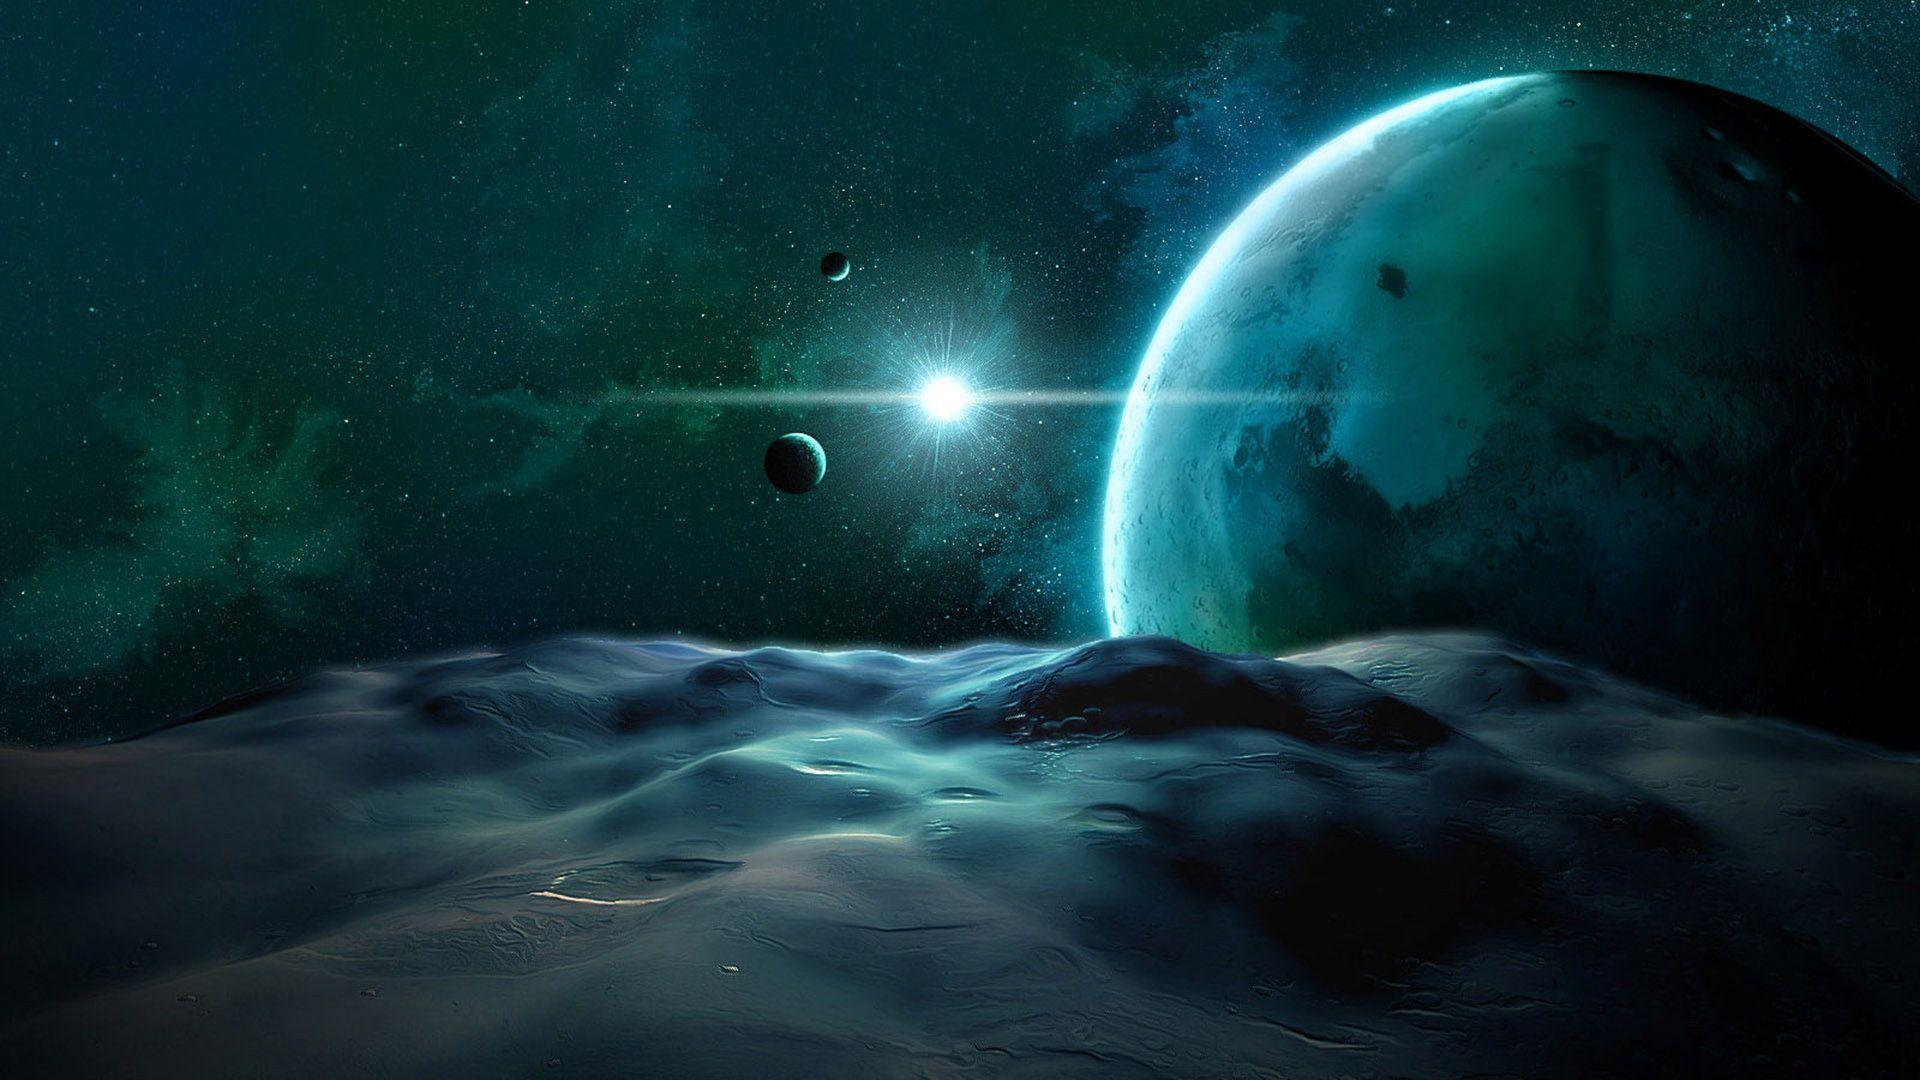 Wallpapers For > Space Desktop Backgrounds 1920x1080